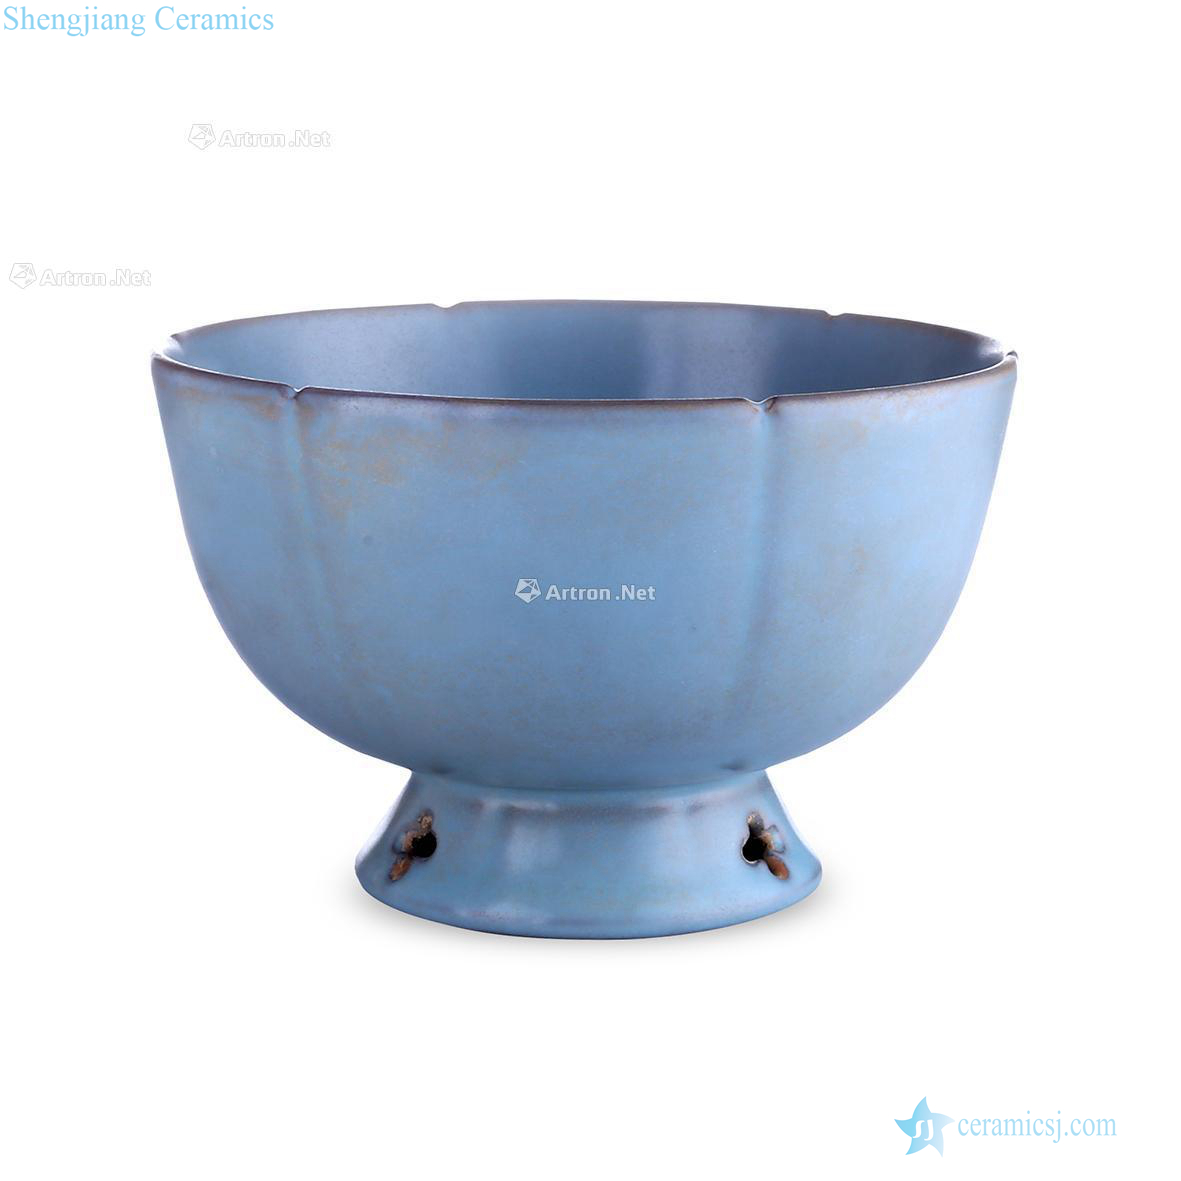 The song dynasty Your kiln kwai mouth bowl